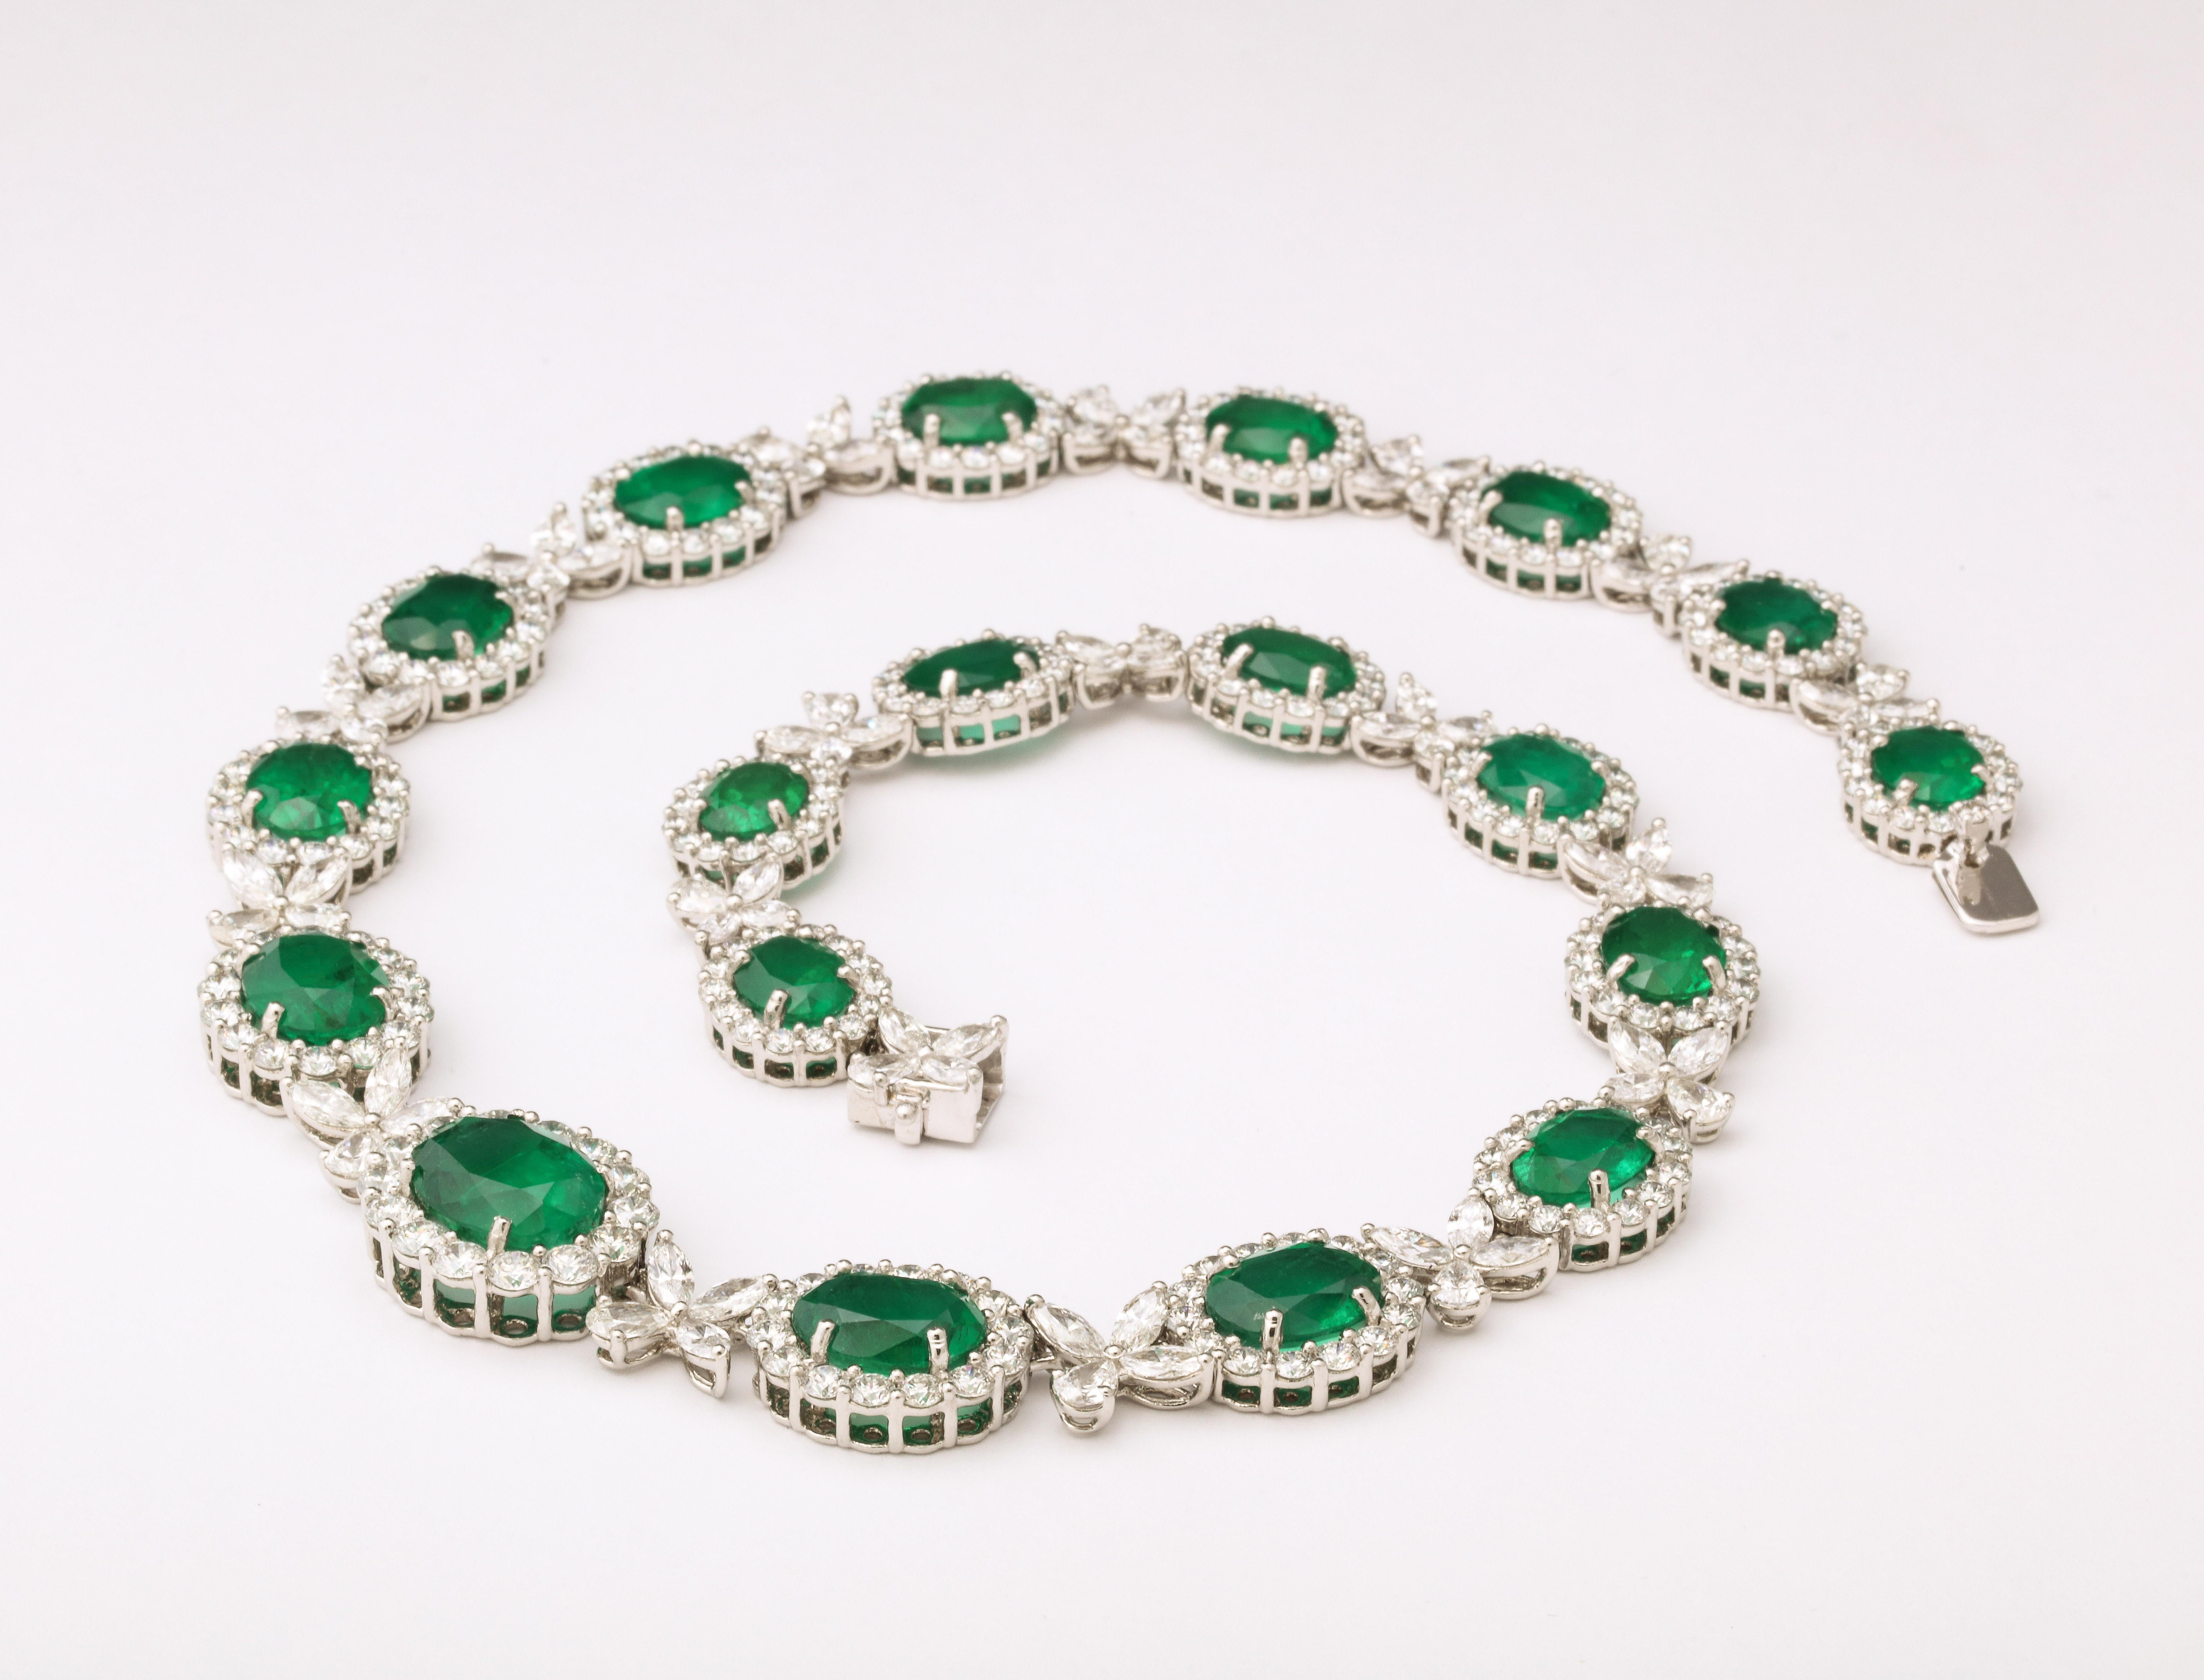 
A timeless design!

61.85 carats of Fine certified VIVID GREEN Oval Emeralds 

37.91 carats of white round brilliant, pear and marquise cut diamonds. 

Set in platinum. 

17.5 inch length. 

Certified by Christian Dunaigre of Switzerland,